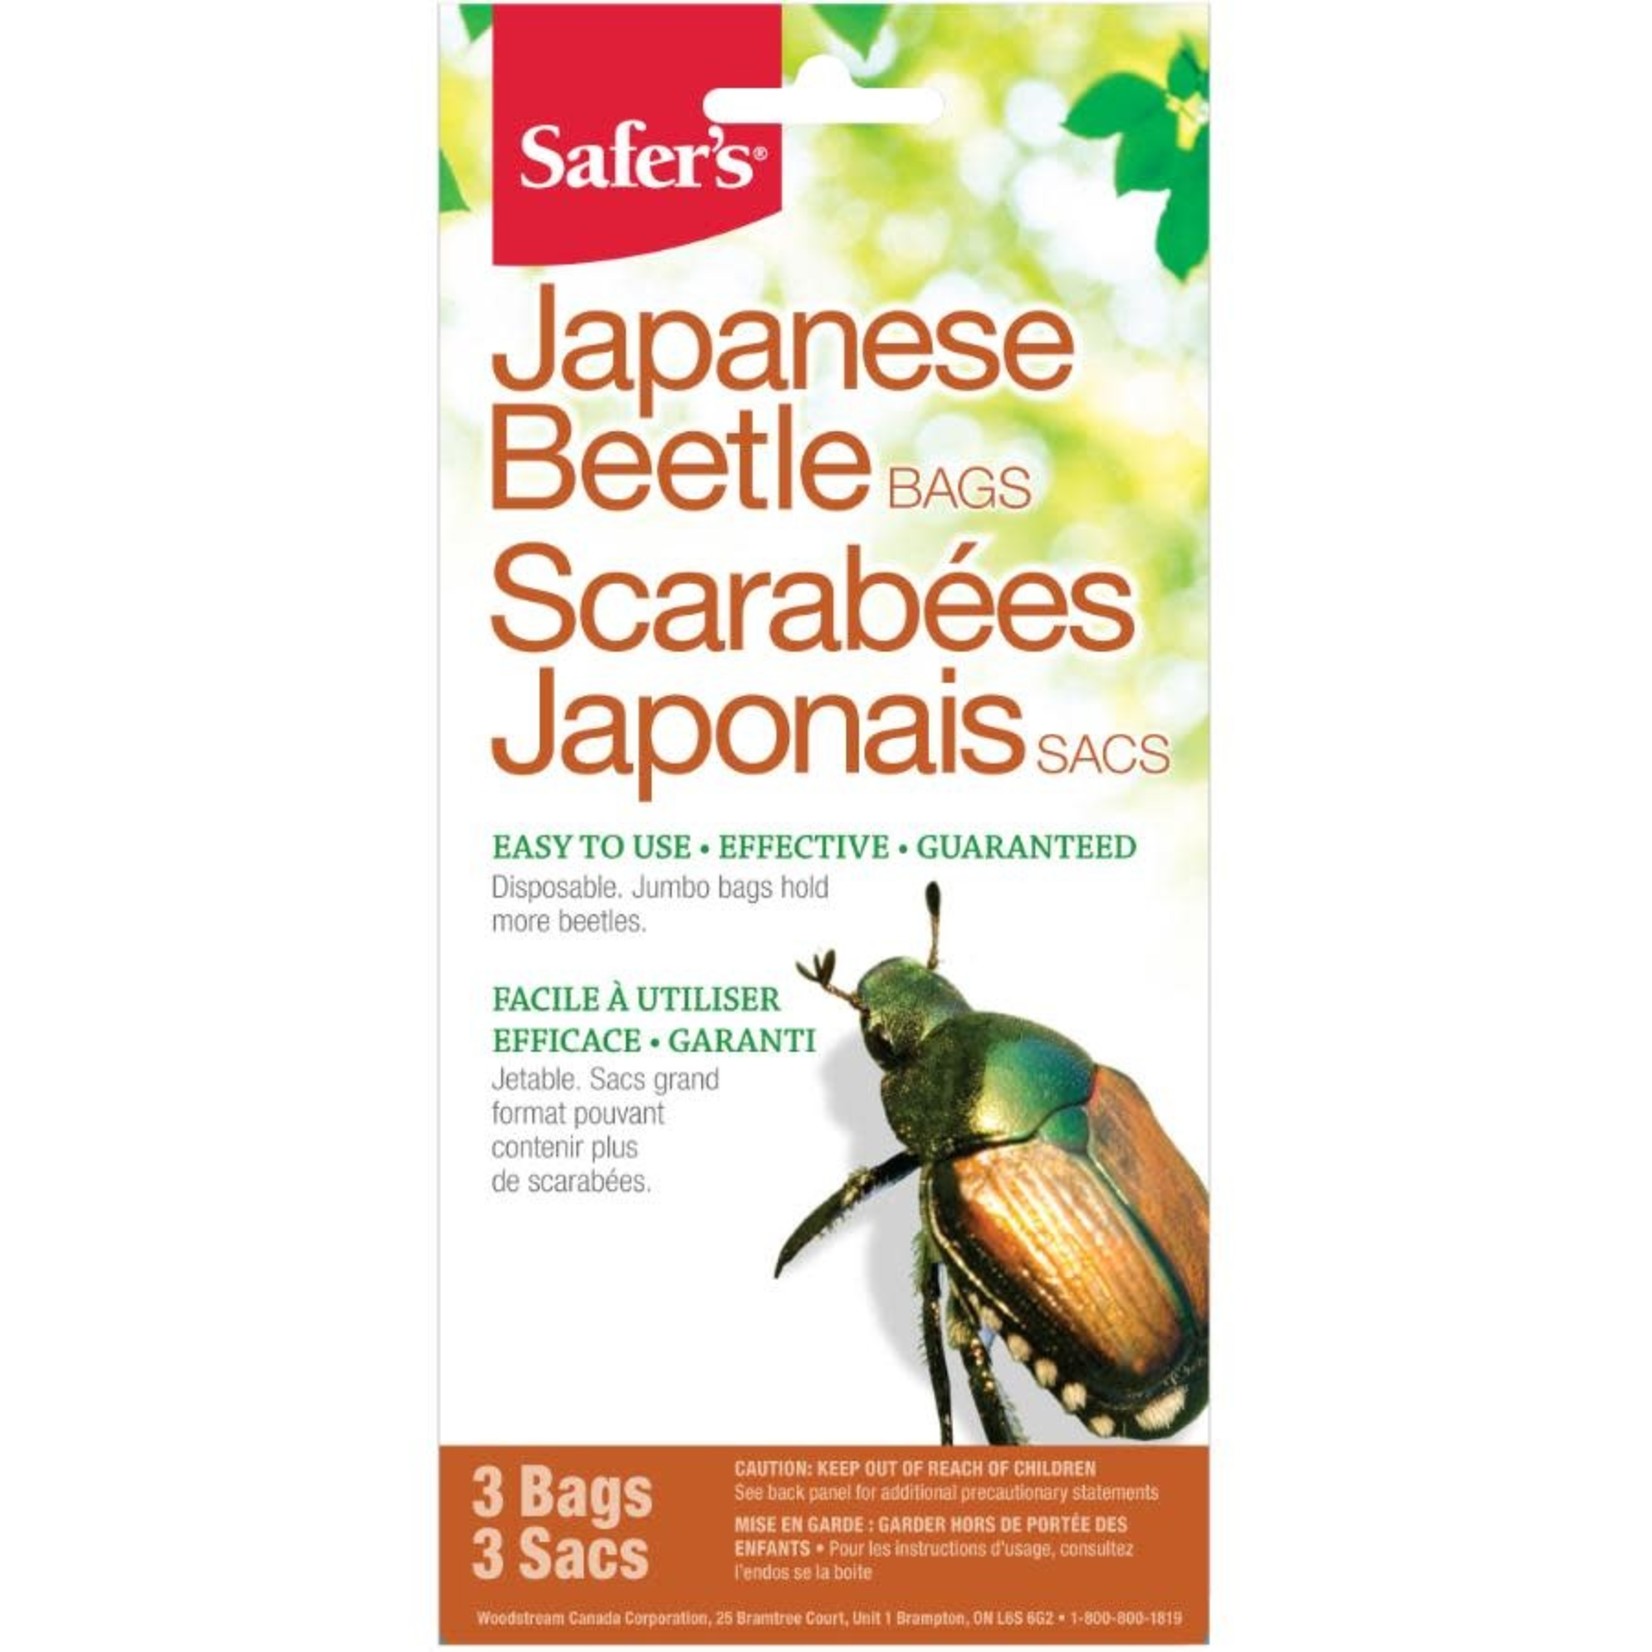 Safers Safer's Japanese Beetle Replacement Bags